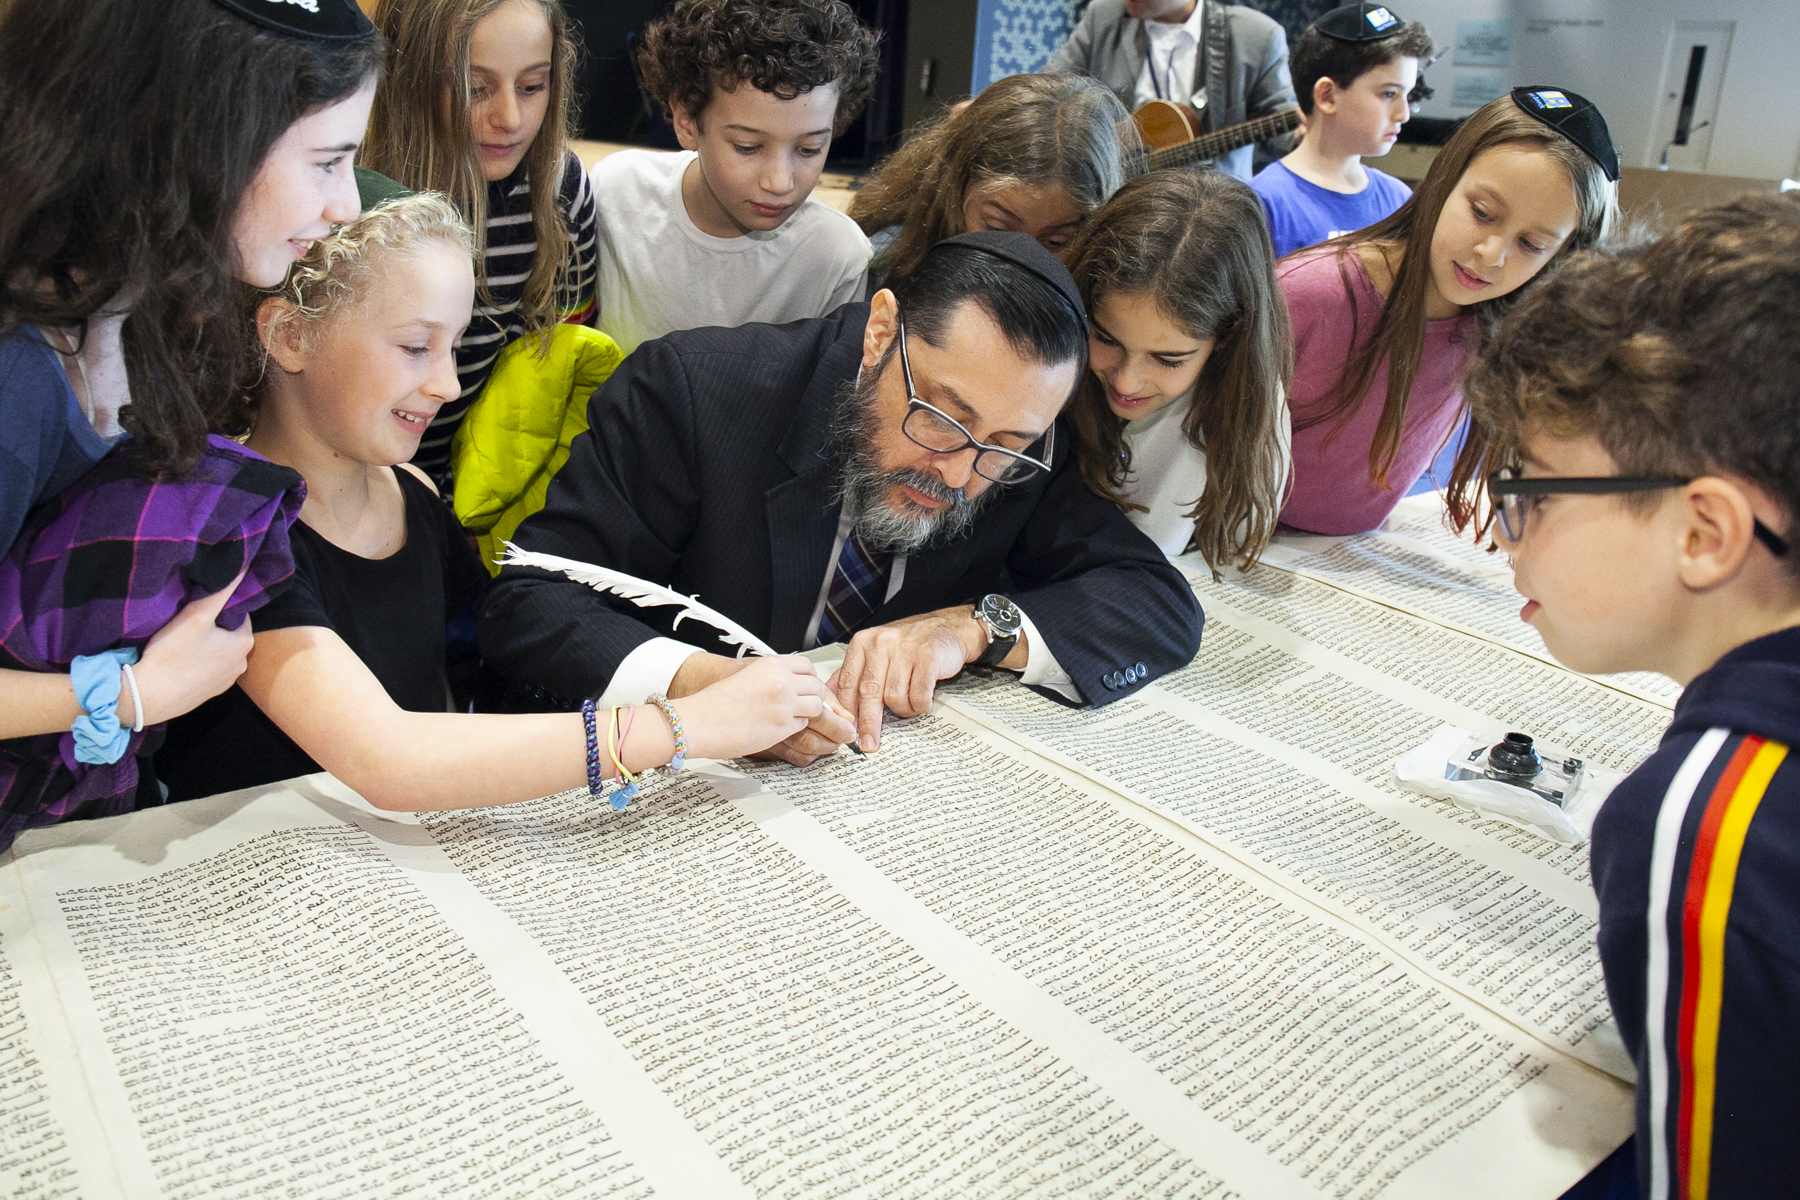 Rabbi Yochanan Salazar inscribing letters in a scroll together with children. Rabbit Salazar is surrounded by children watching the process with focus and interest.